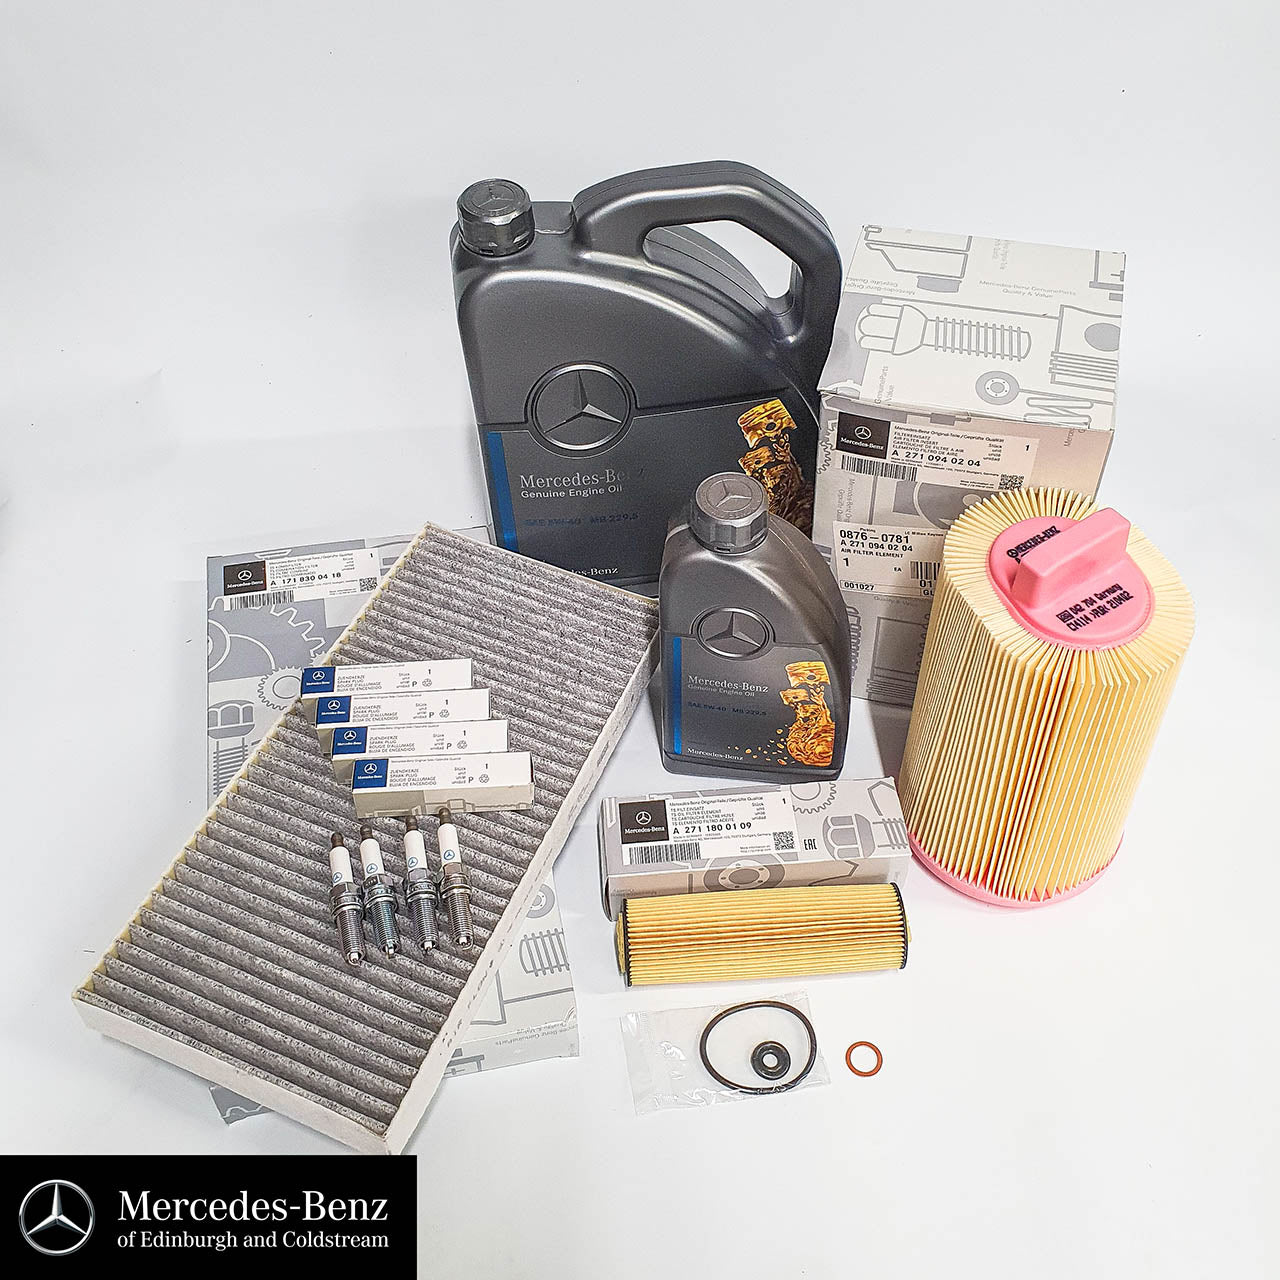 Genuine Mercedes-Benz M271 engine service kit 6L of engine oil and filters - SLK CL C E Class